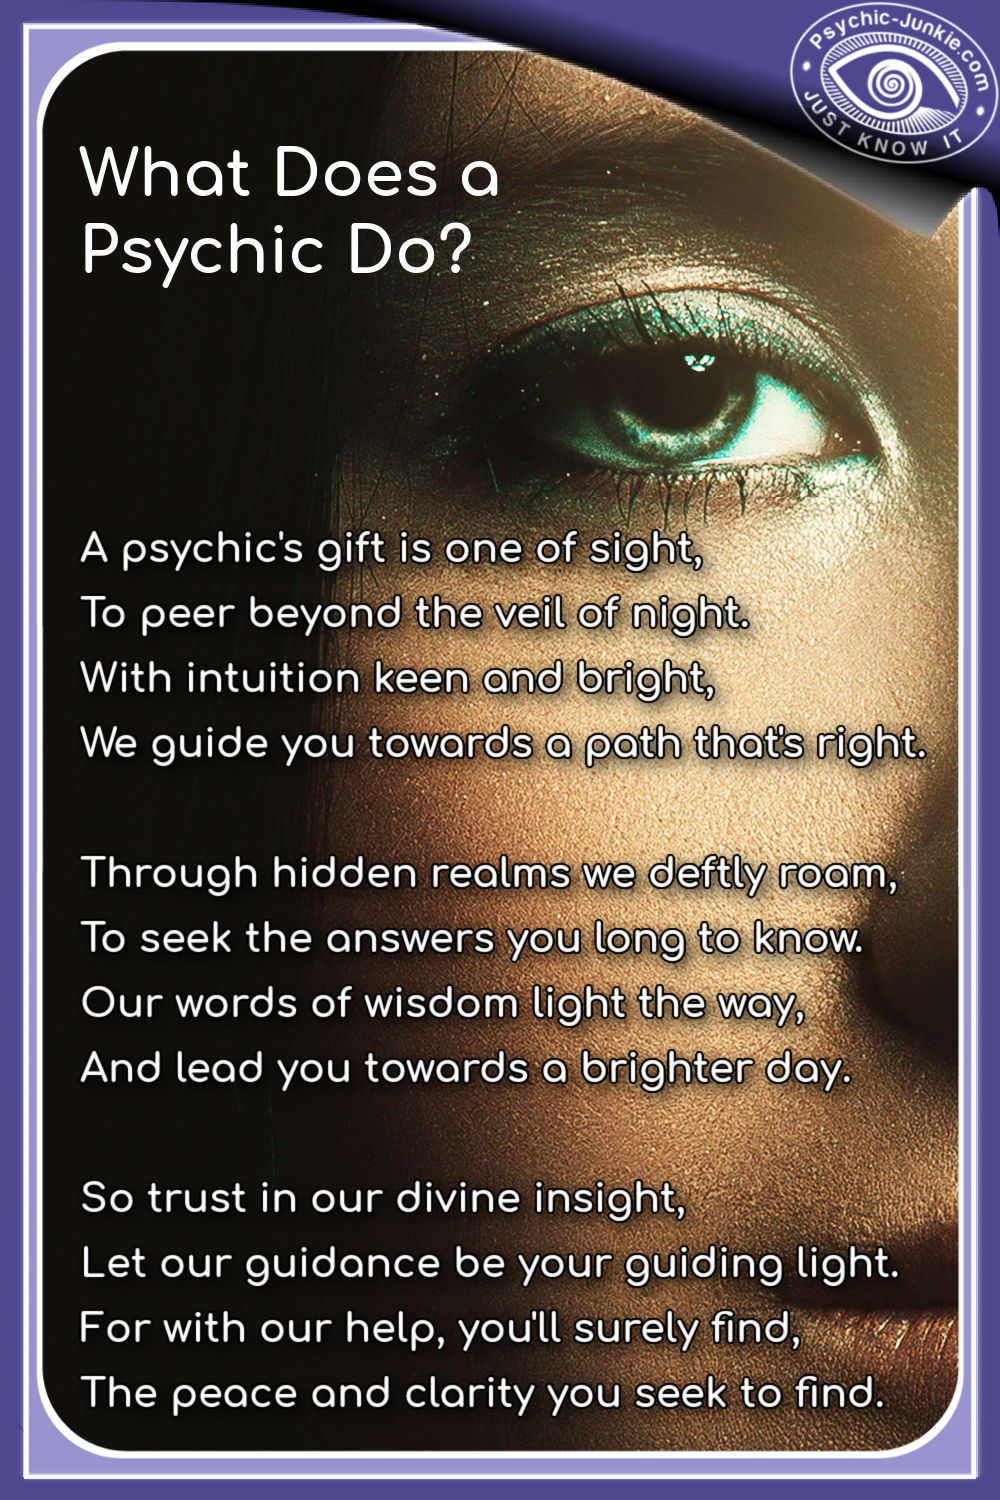 What Does a Psychic Do and How Can They Help You?